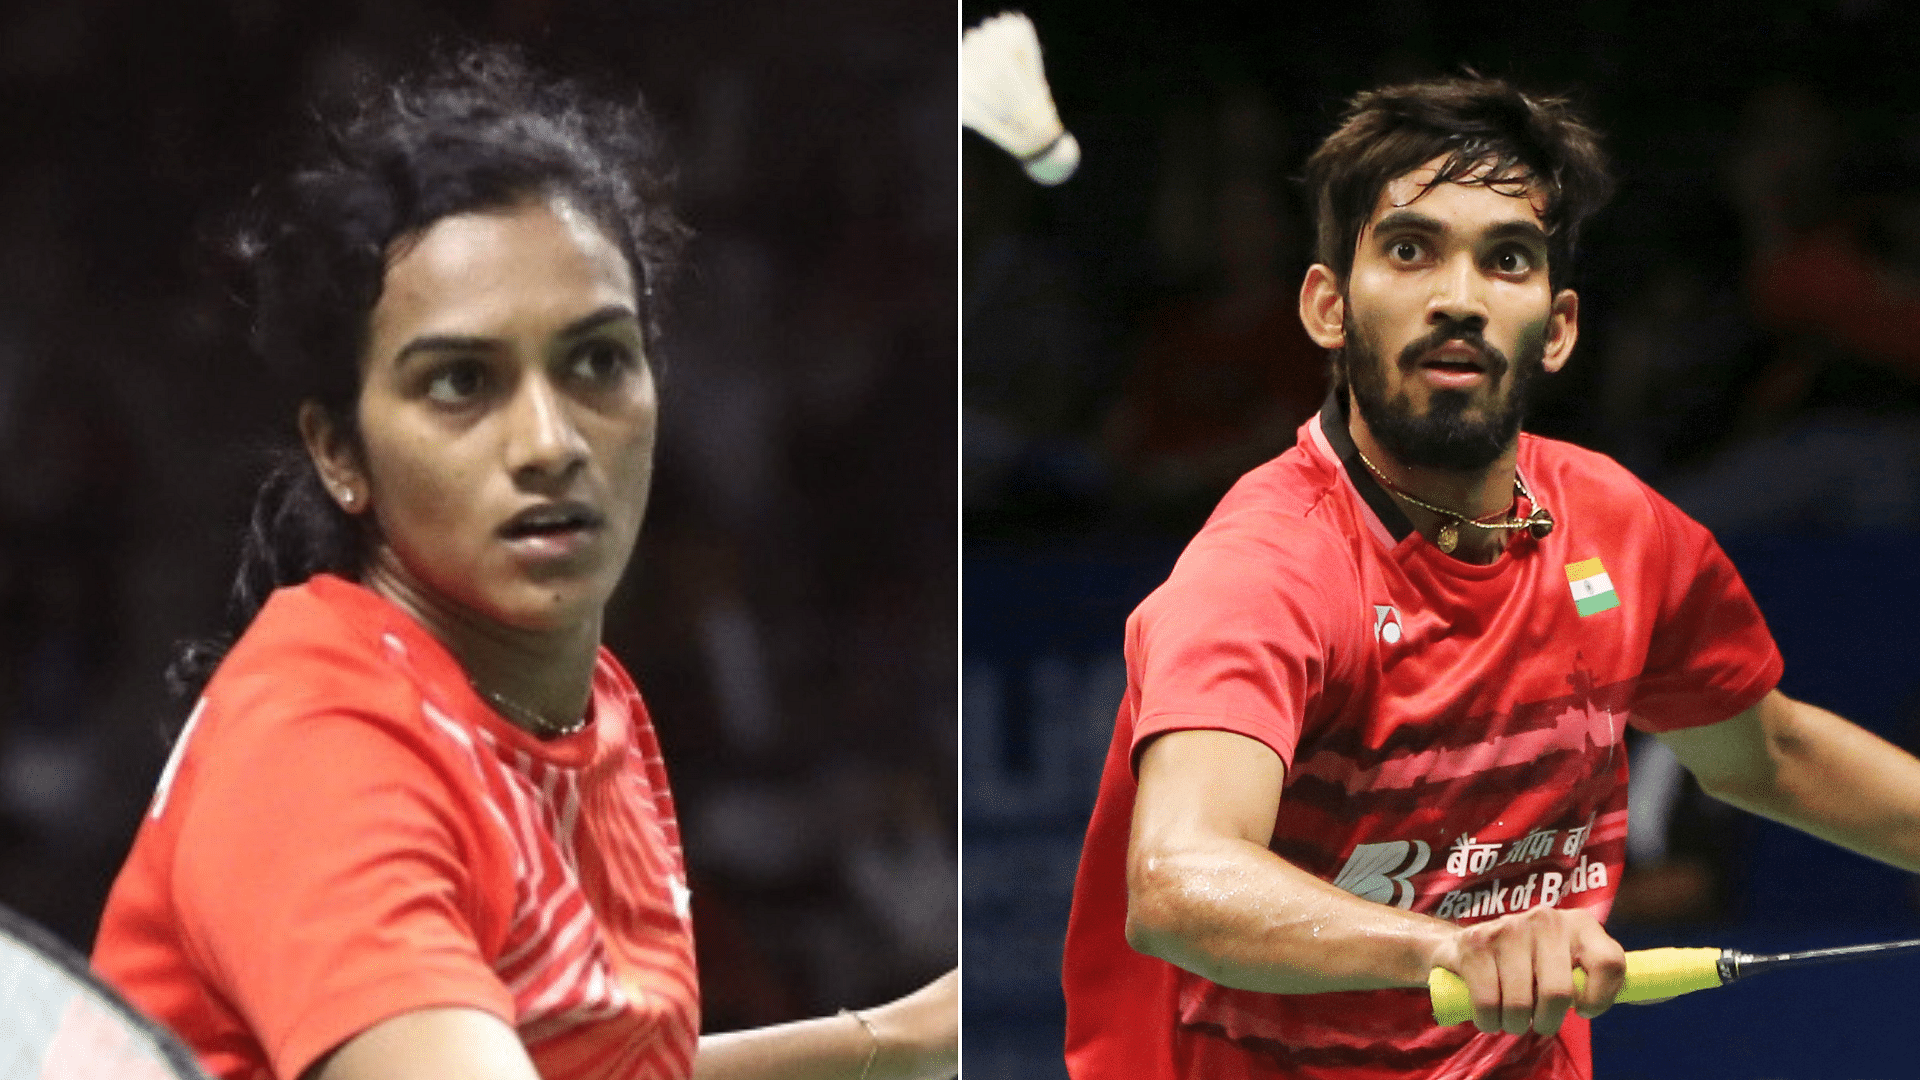 PV Sindhu and Kidambi Srikanth – both former China Open champions – crashed out in the quarter-finals